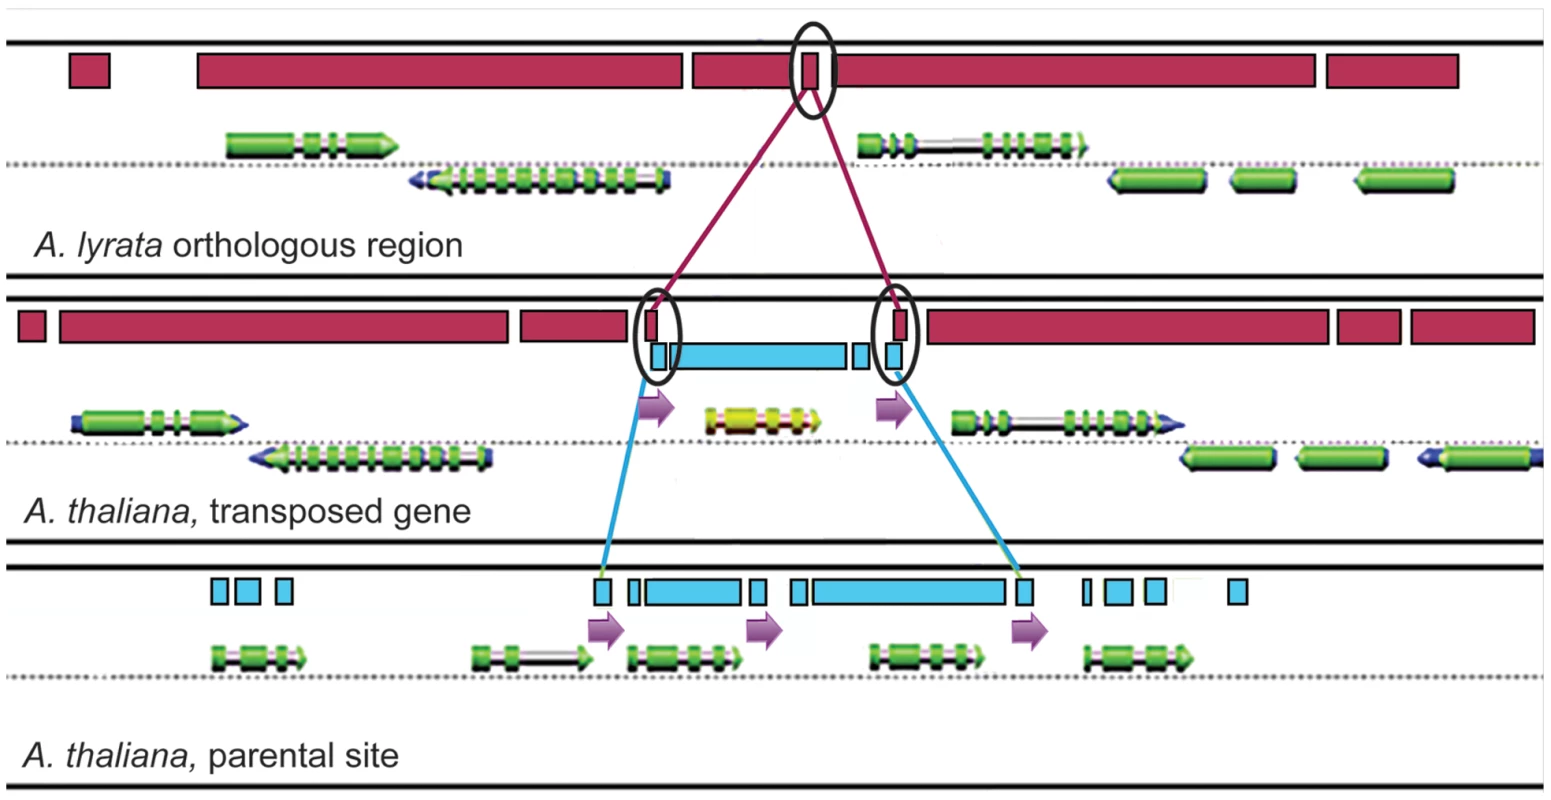 Flanking direct repeats around transposed genes in Arabidopsis.